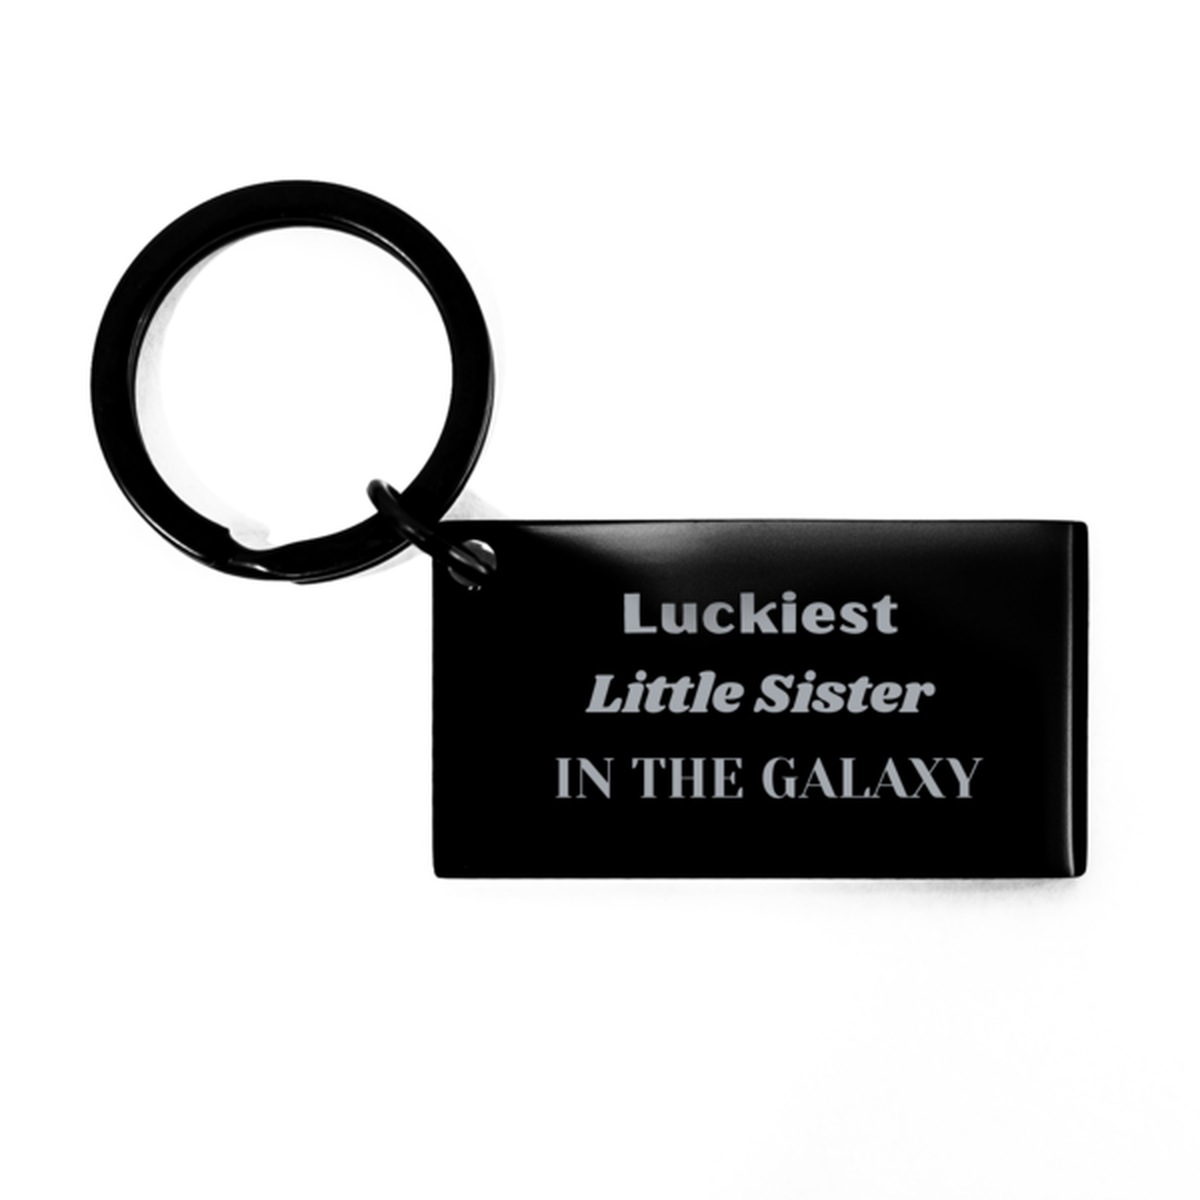 Luckiest Little Sister in the Galaxy, To My Little Sister Engraved Gifts, Christmas Little Sister Keychain Gifts, X-mas Birthday Unique Gifts For Little Sister Men Women